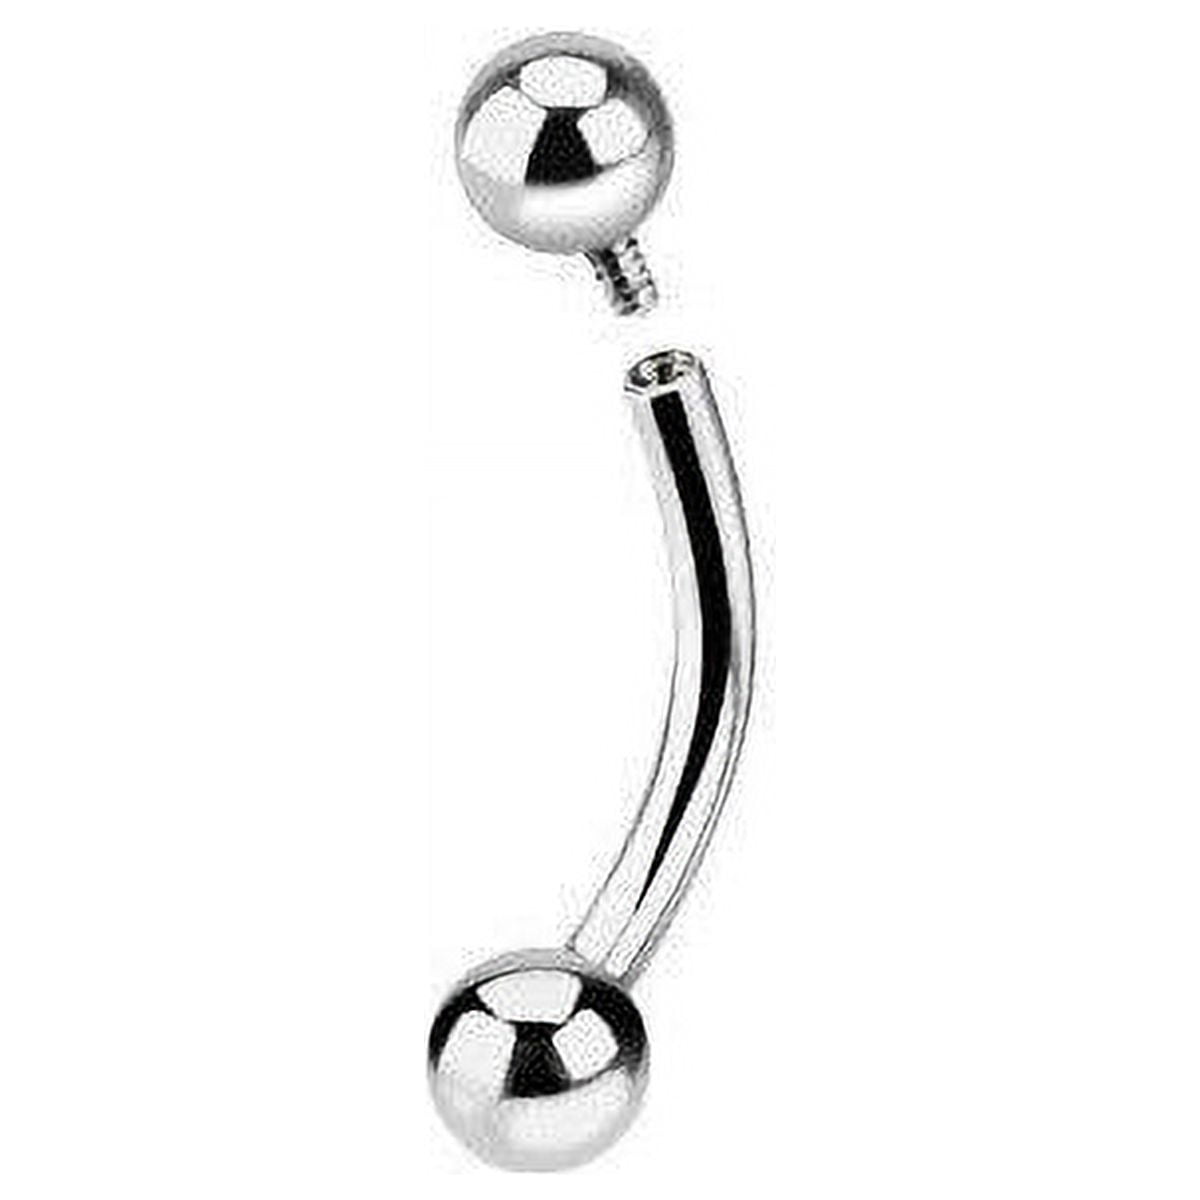 16 Gauge Surgical Steel Eyebrow Ring Curved Barbell